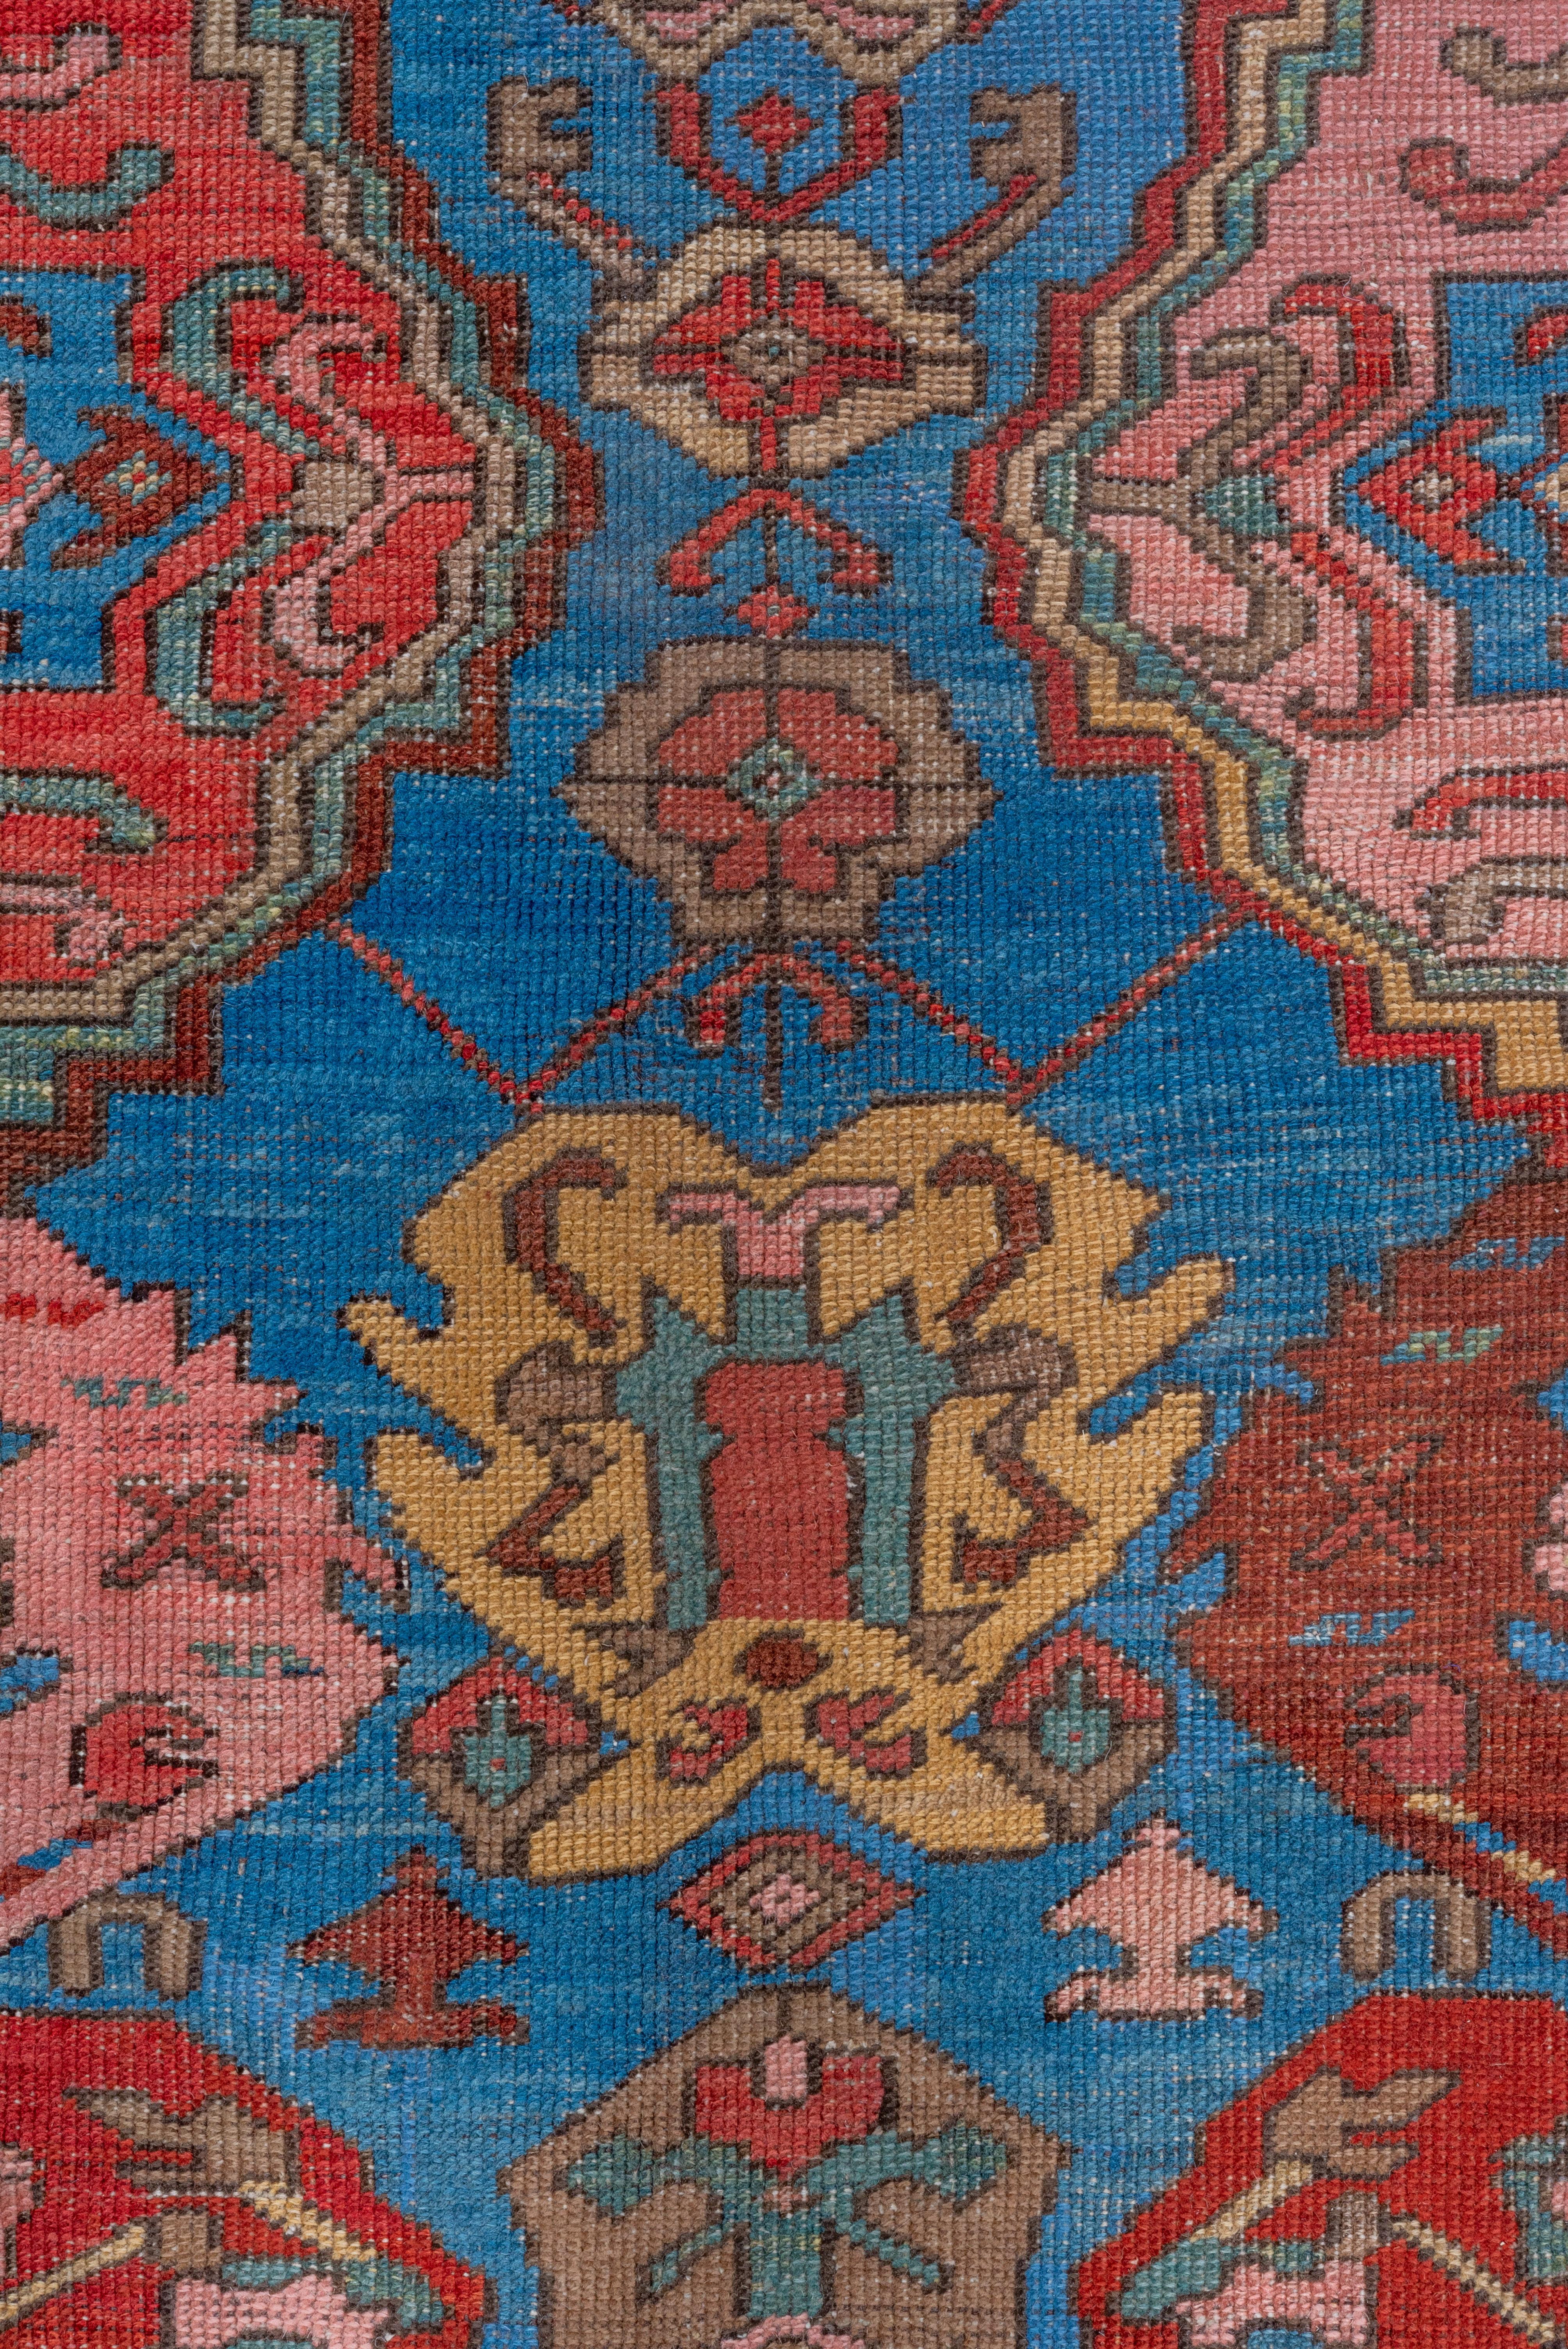 Outsanding Colorful Antique Persian Bakhshayesh Carpet, Late 19th Century In Good Condition For Sale In New York, NY